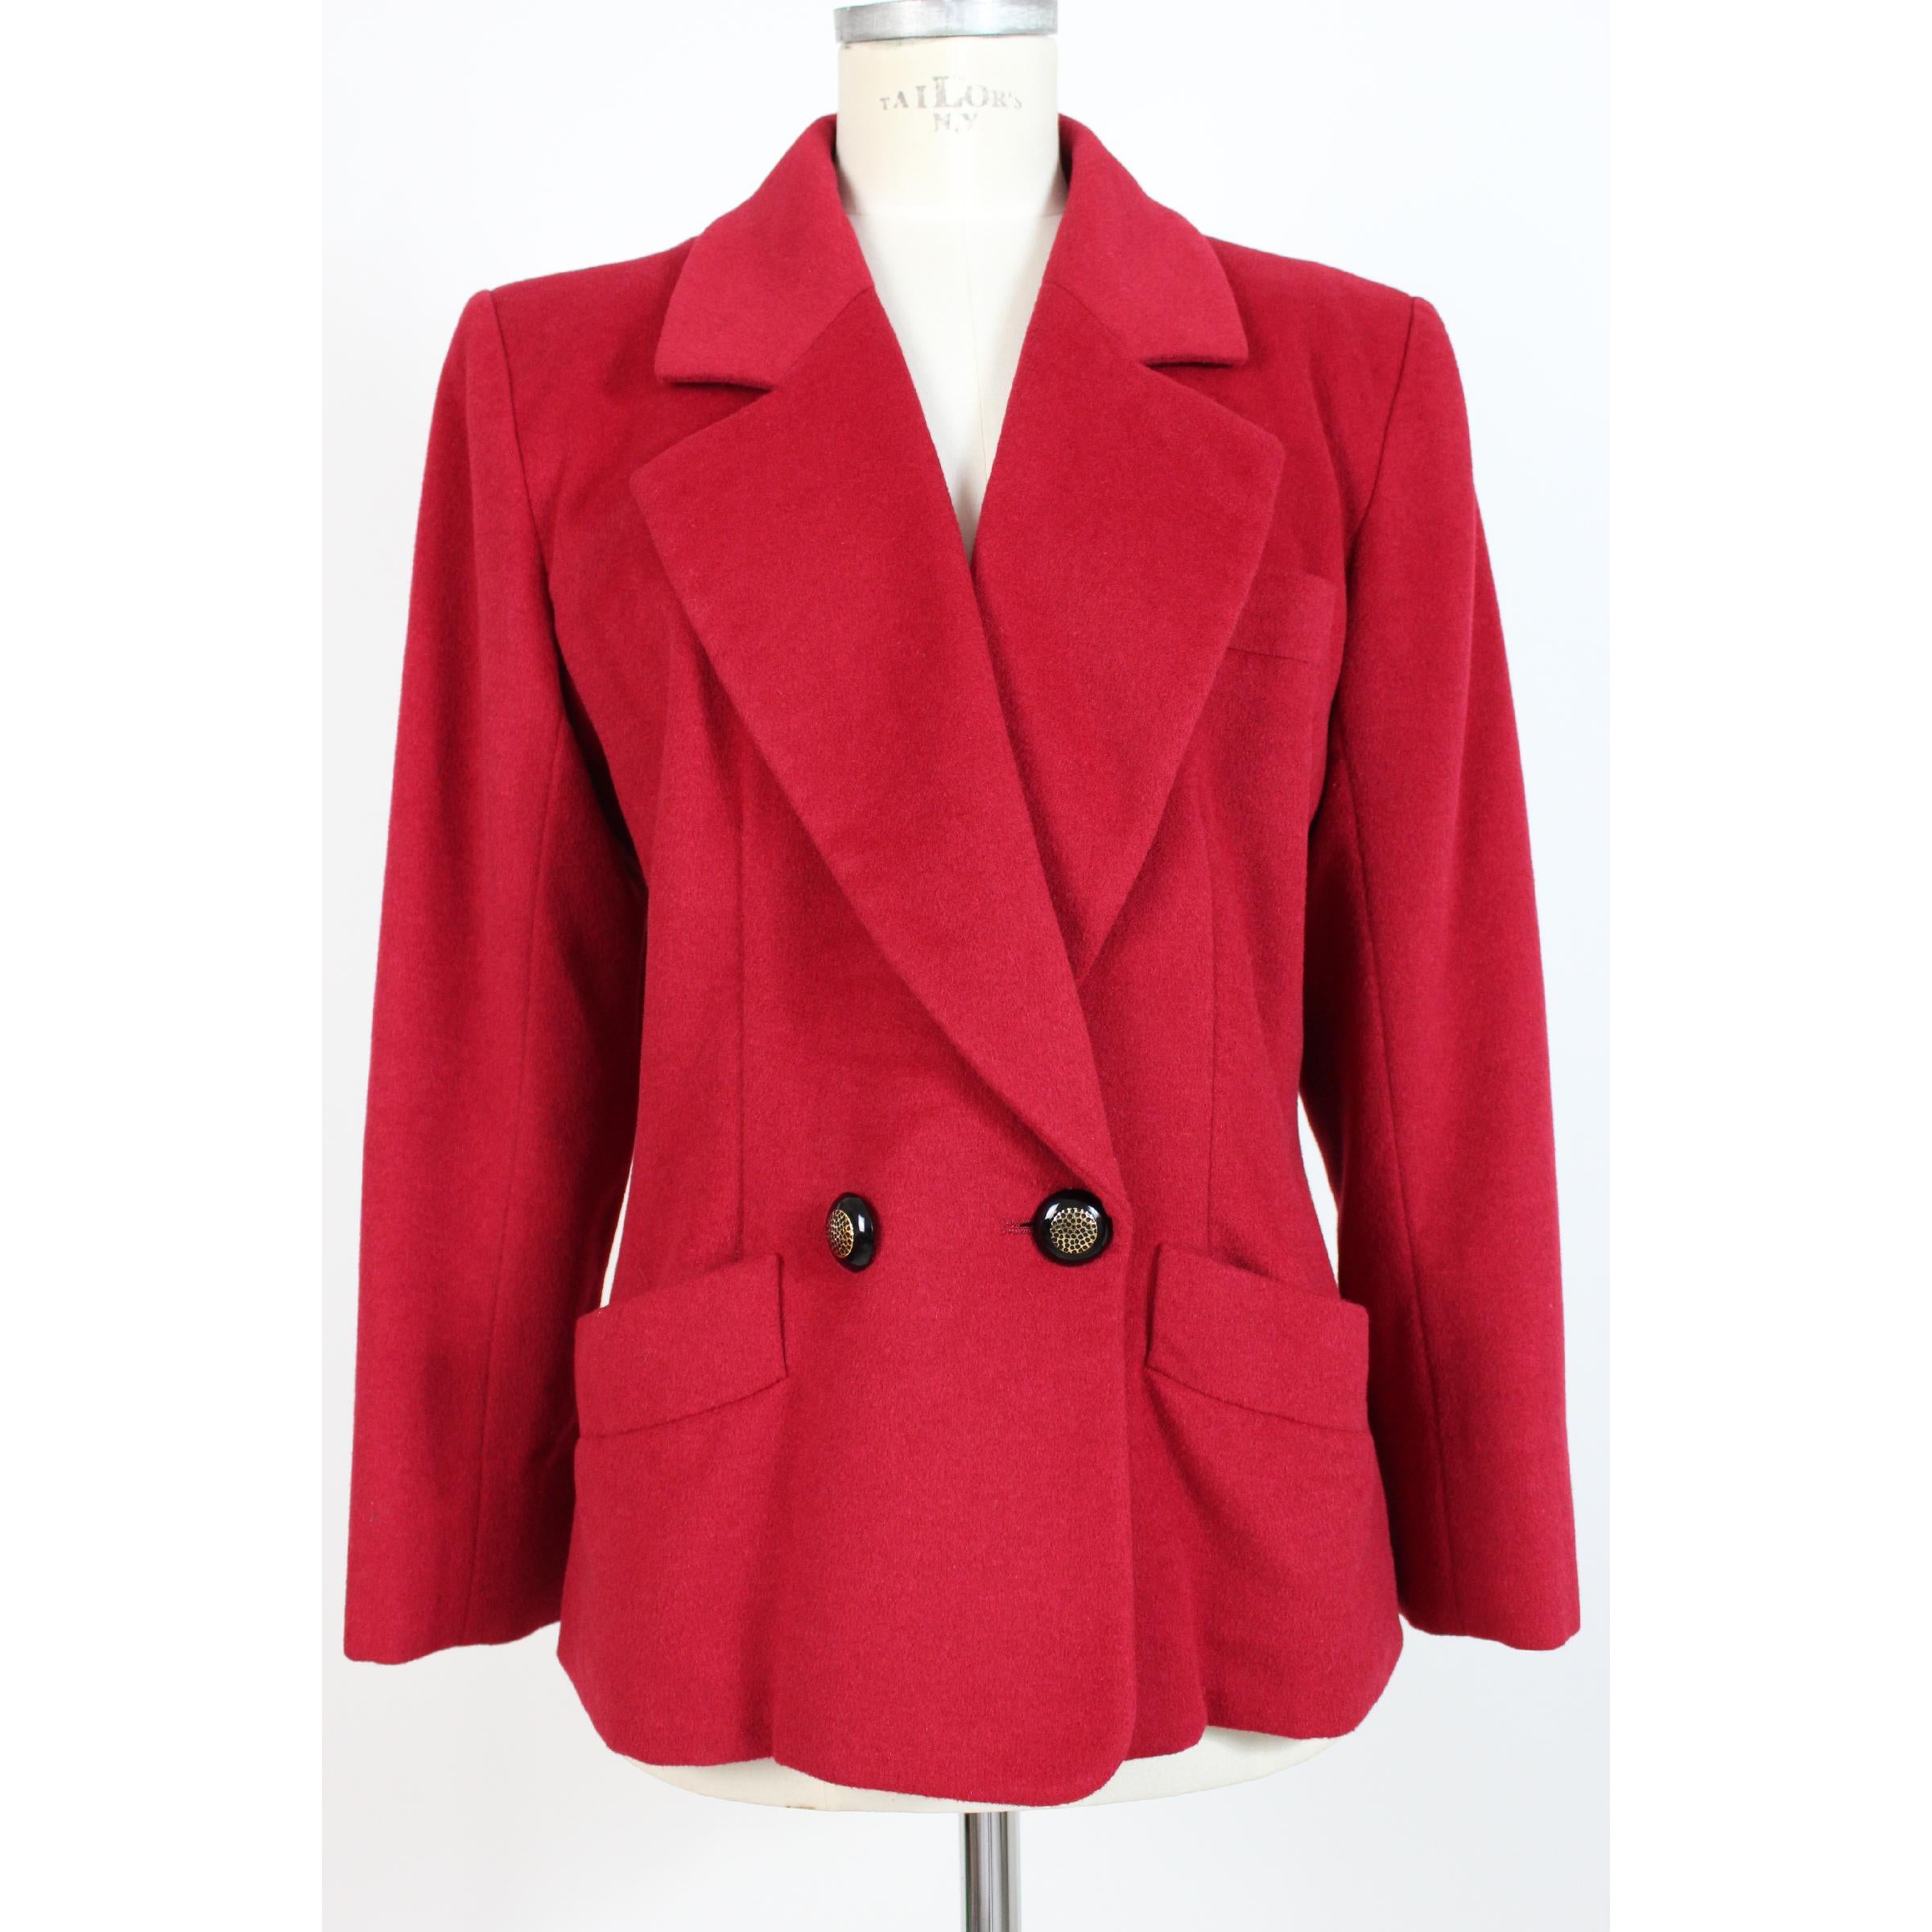 Yves Saint Laurent vintage women's jacket, double-breasted red color, jewel button closure, 70% wool 15% cashmere 15% angora. 1990s. Made in France. Excellent vintage conditions.

Size: 46 It 12 Us 14 Uk

Shoulder: 46 cm

Bust / Chest: 56